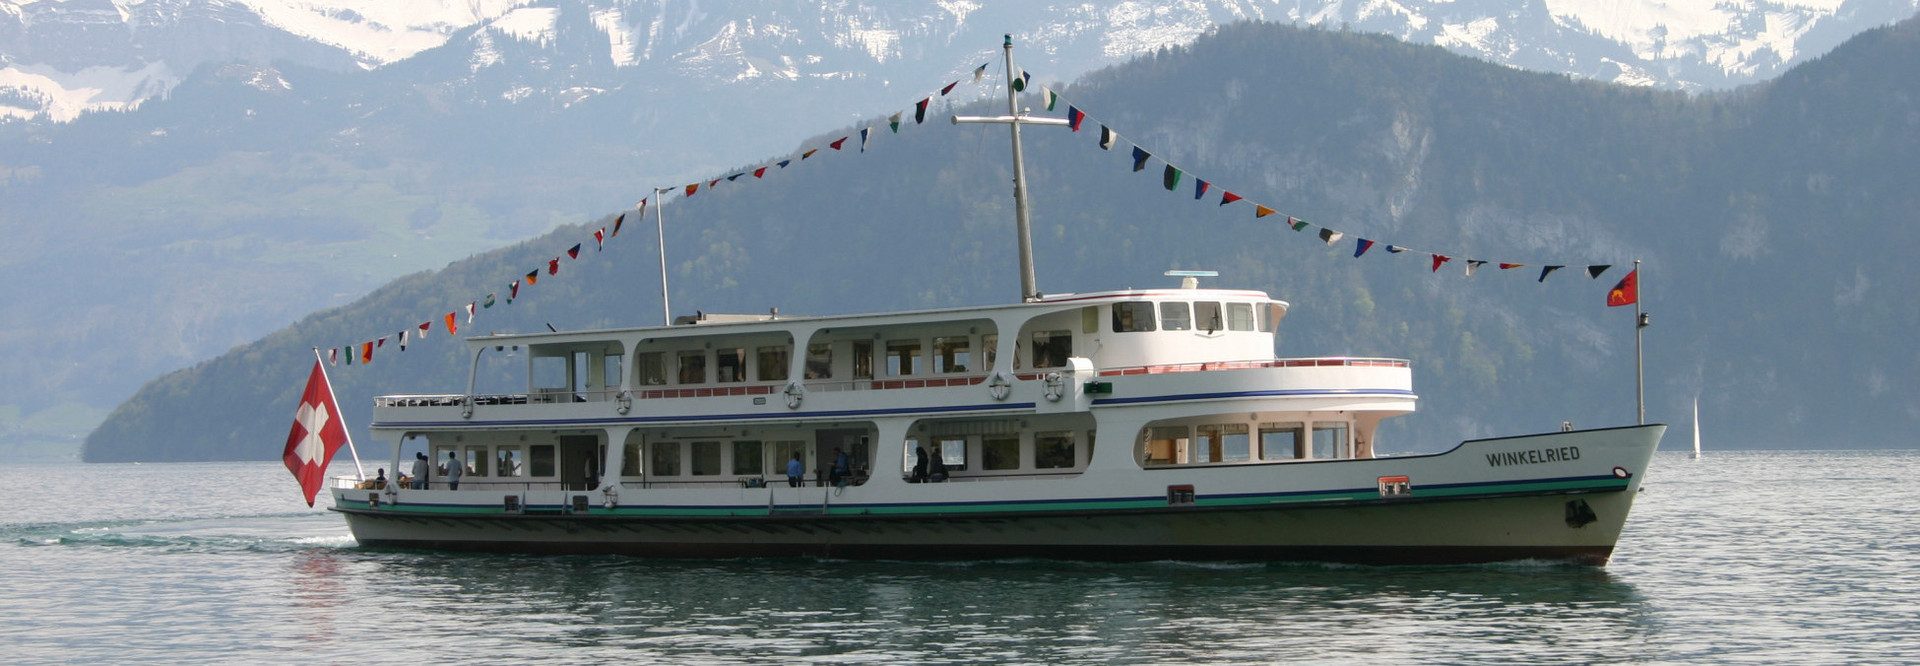 During a cruise on Lake Lucerne, fixed flags adorn the motor ship Winkelried.